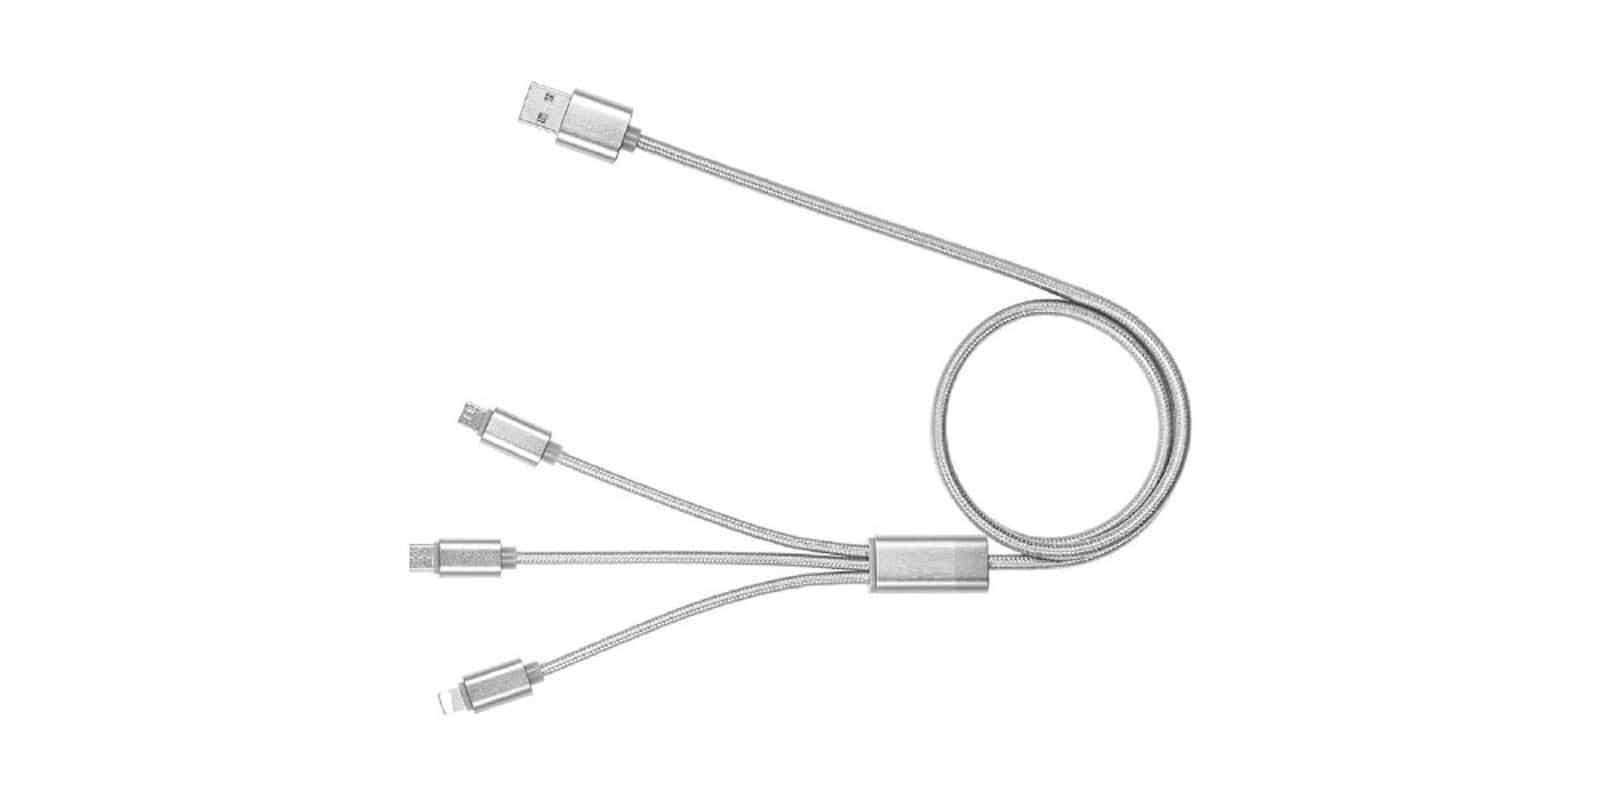 This single cable contains plugs for USB-C, MicroUSB, and Lightning connected devices.